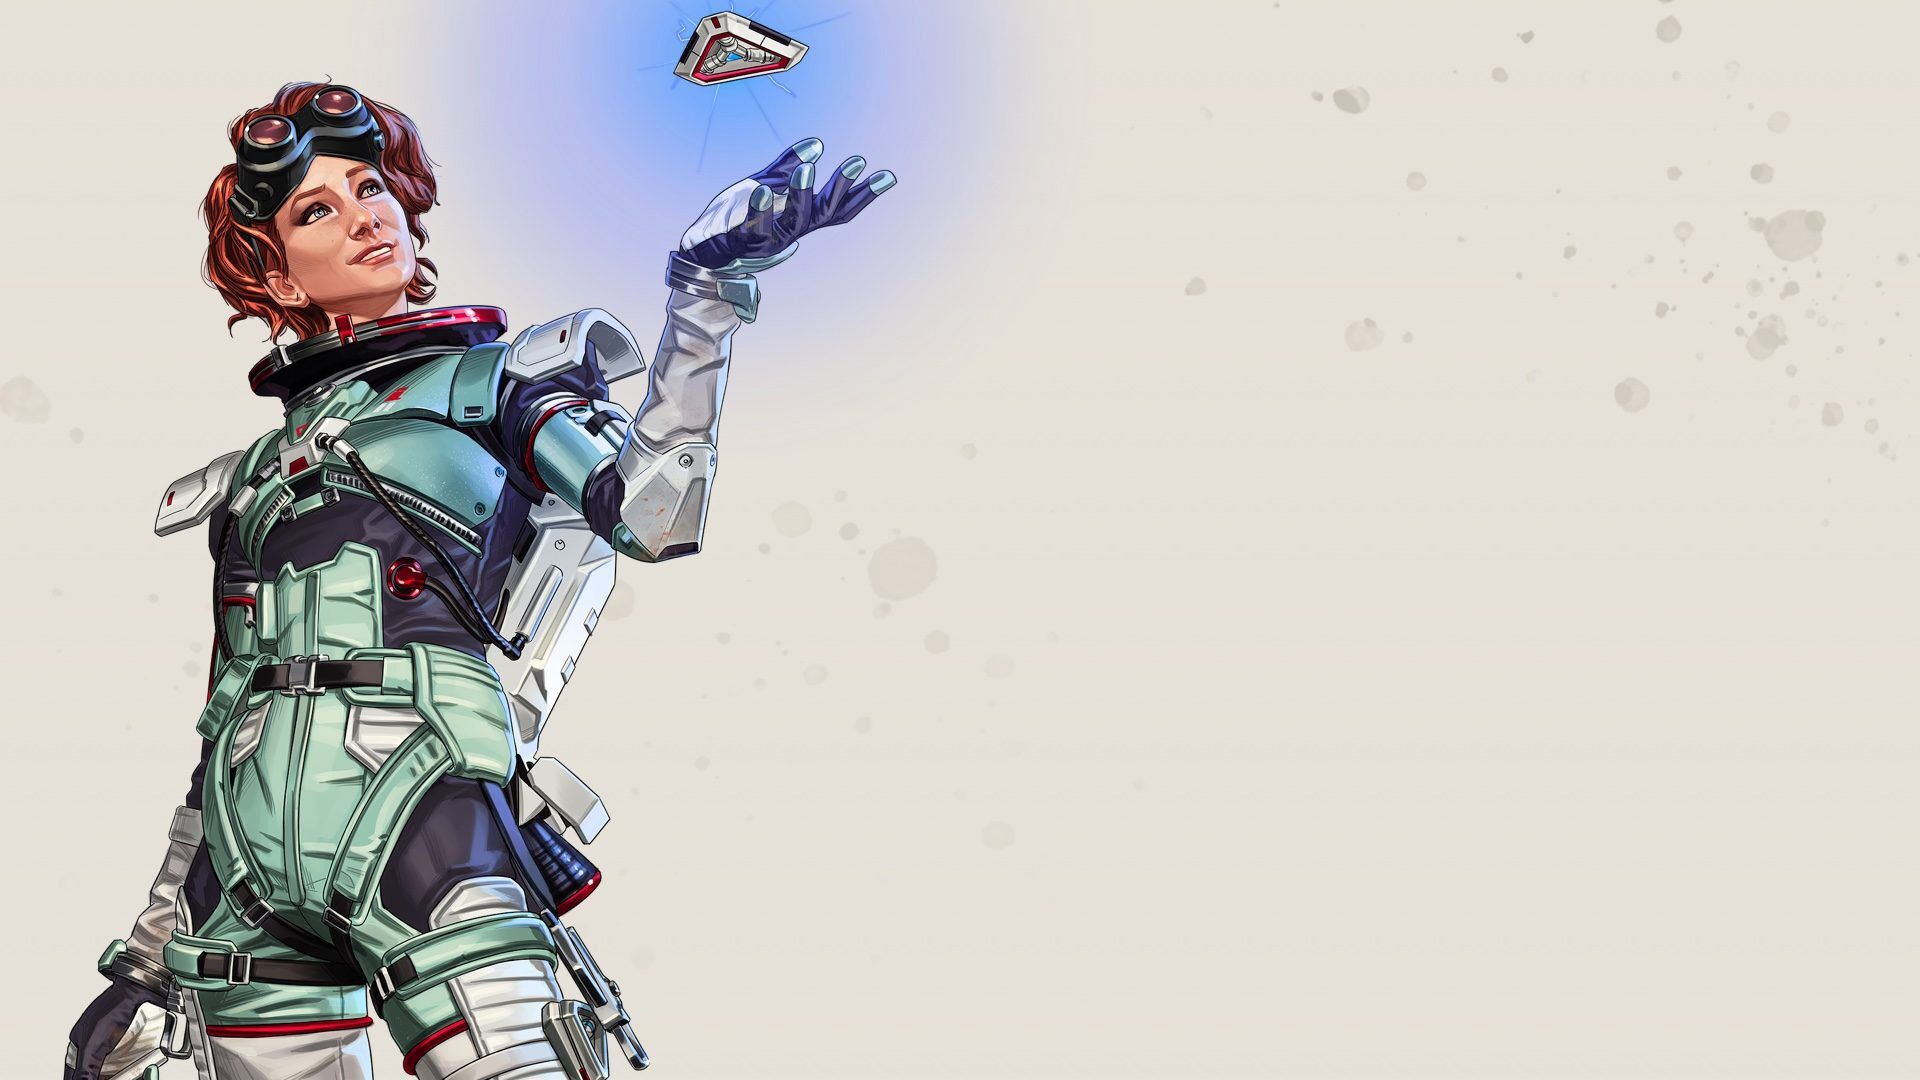 Check out new Apex Legends character .pcinvasion.com